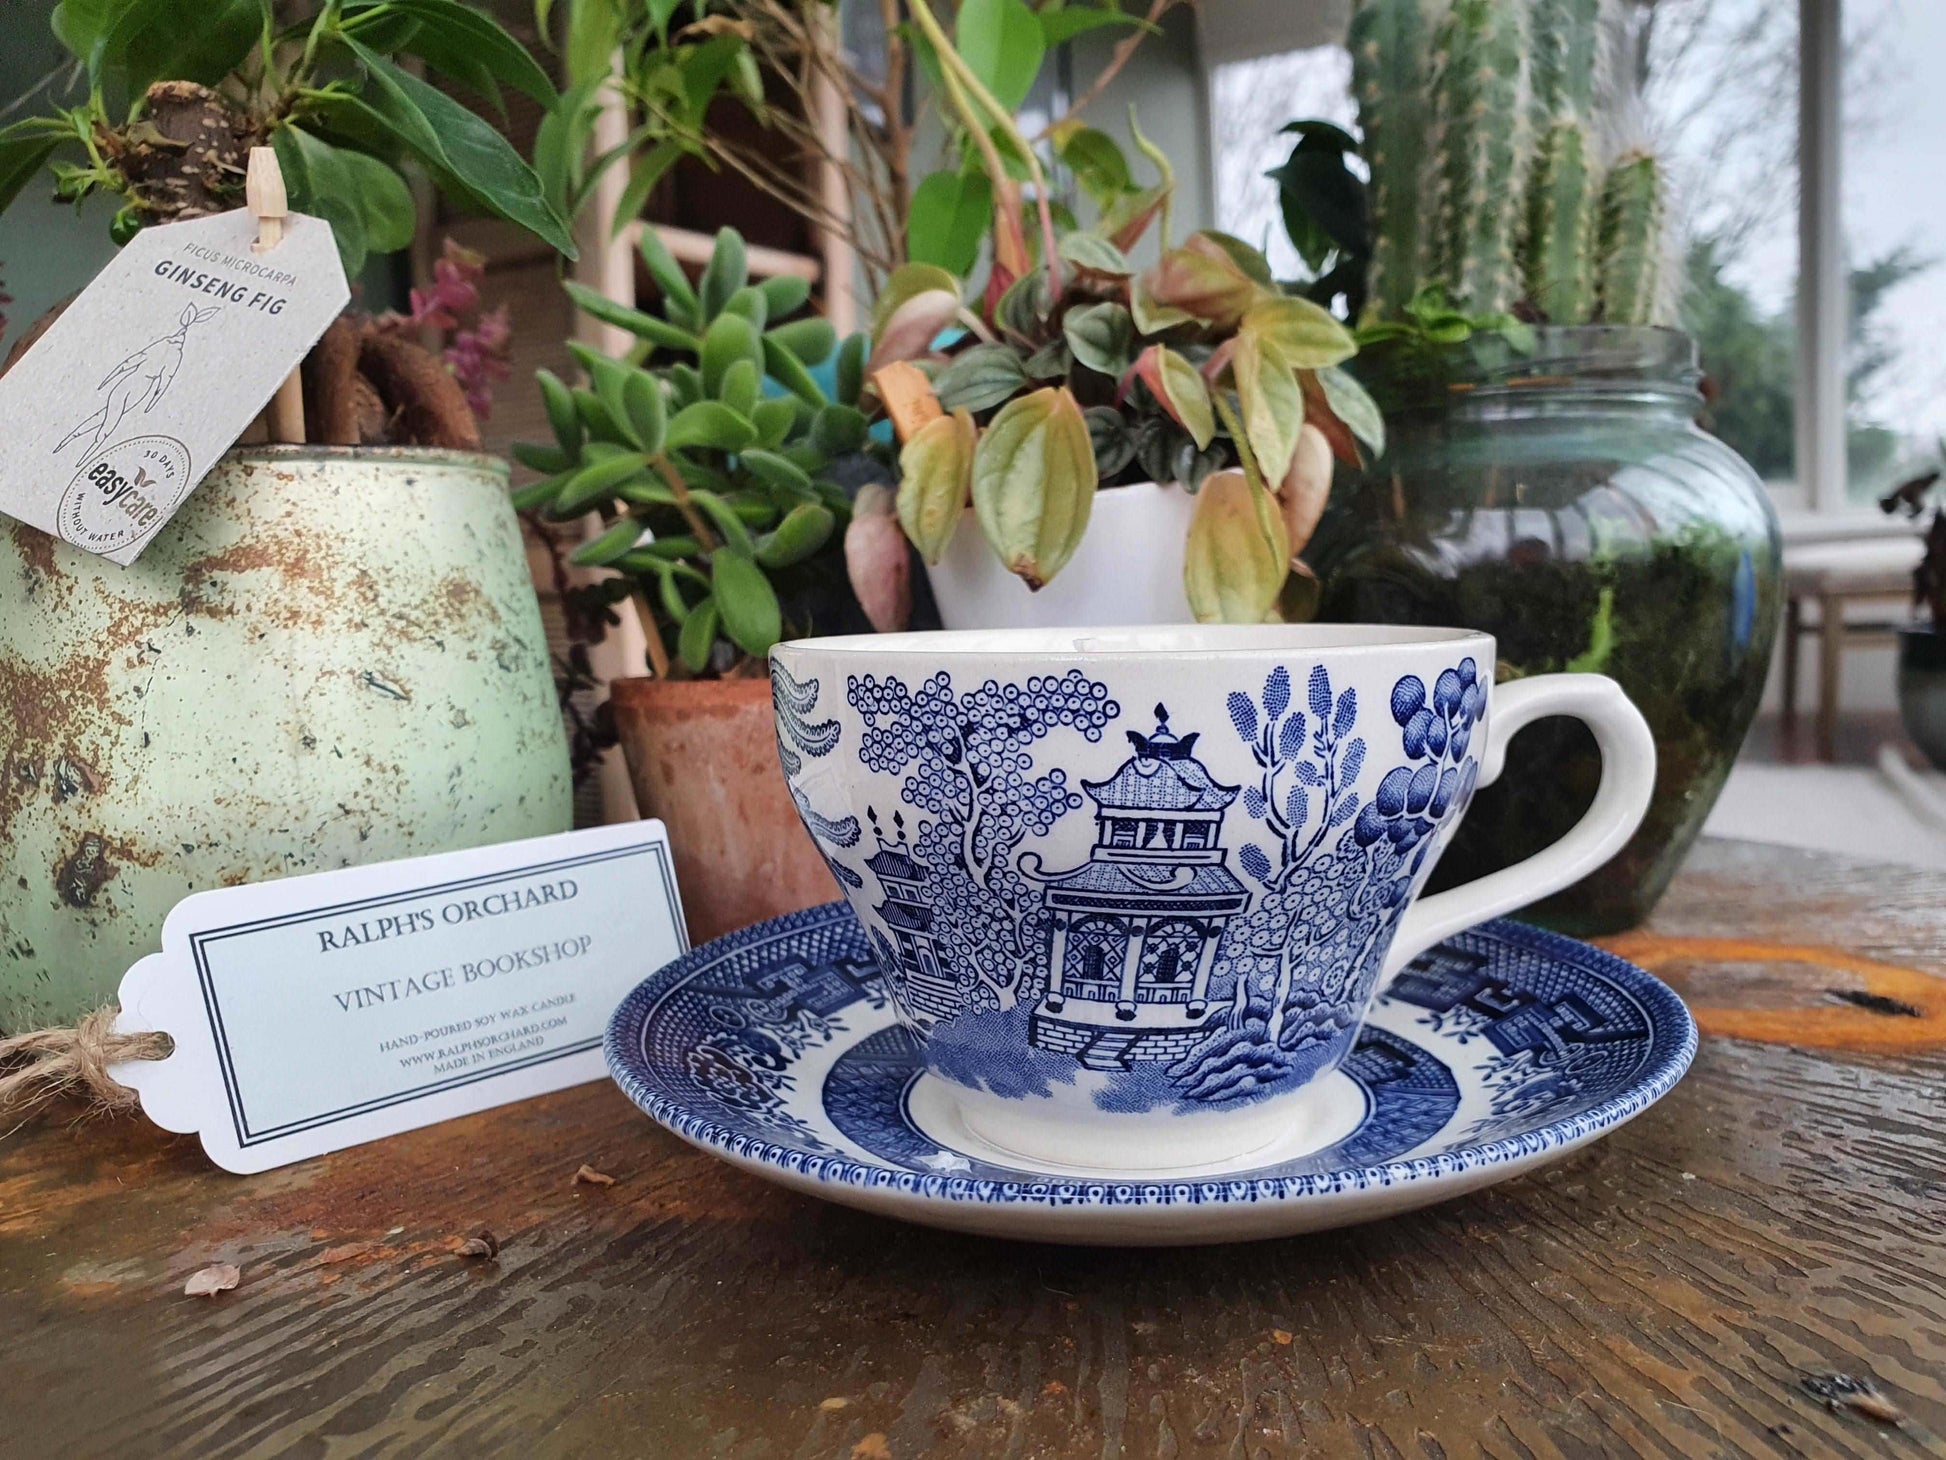 Blue Willow teacup candle with Vintage Bookshop scented soy wax Candles Ralph's Orchard 